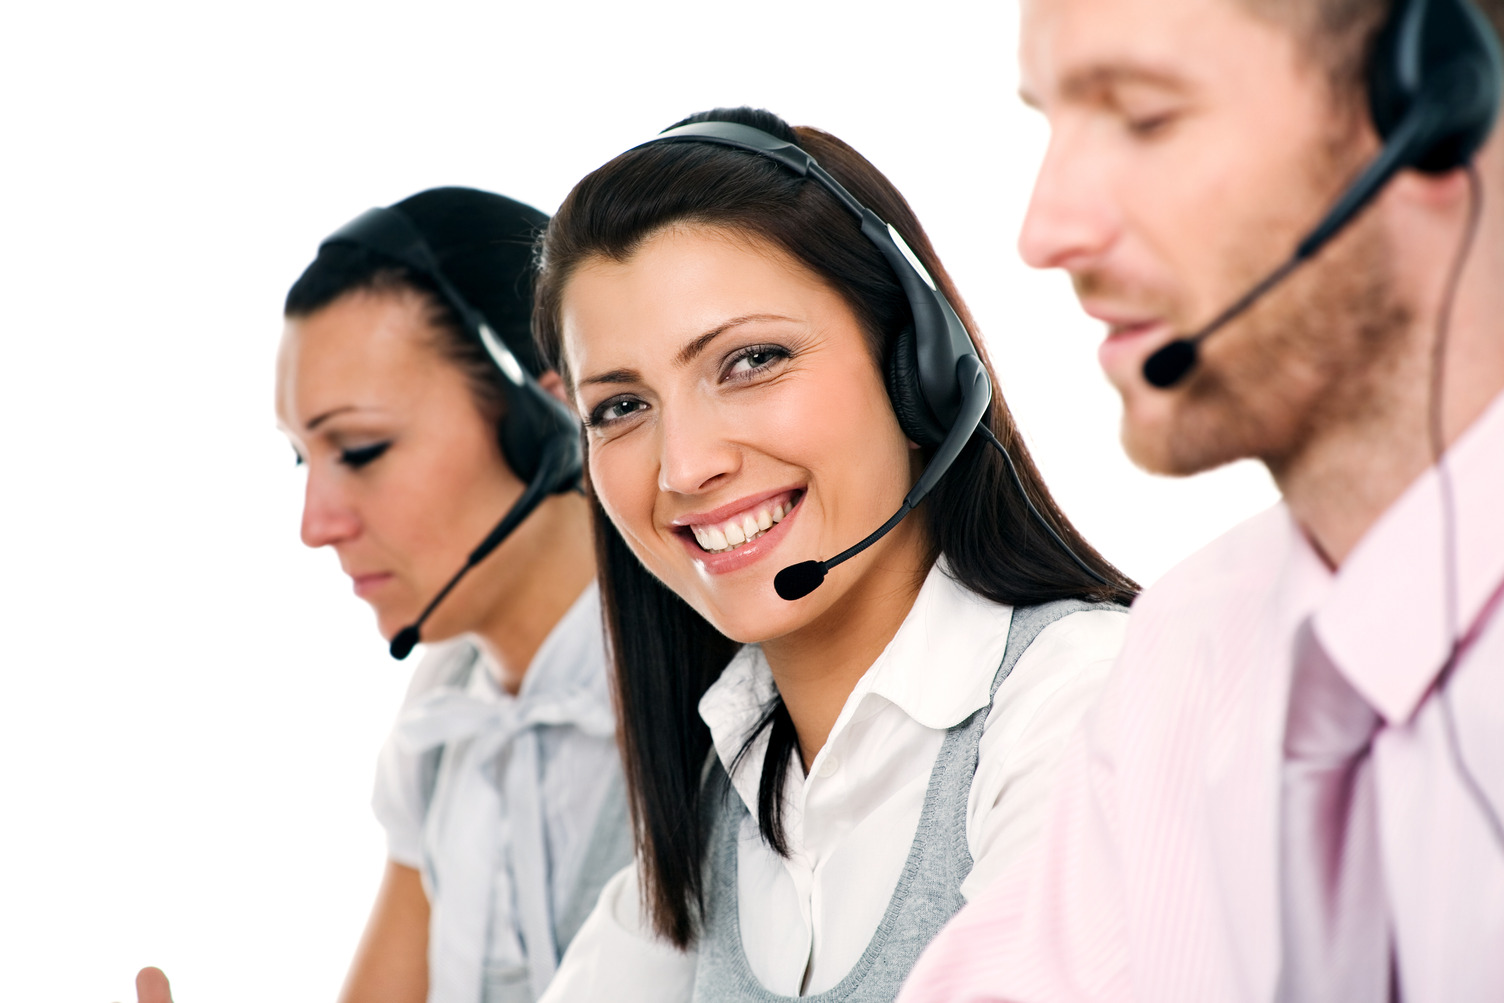 Customer service group with woman smiling widely